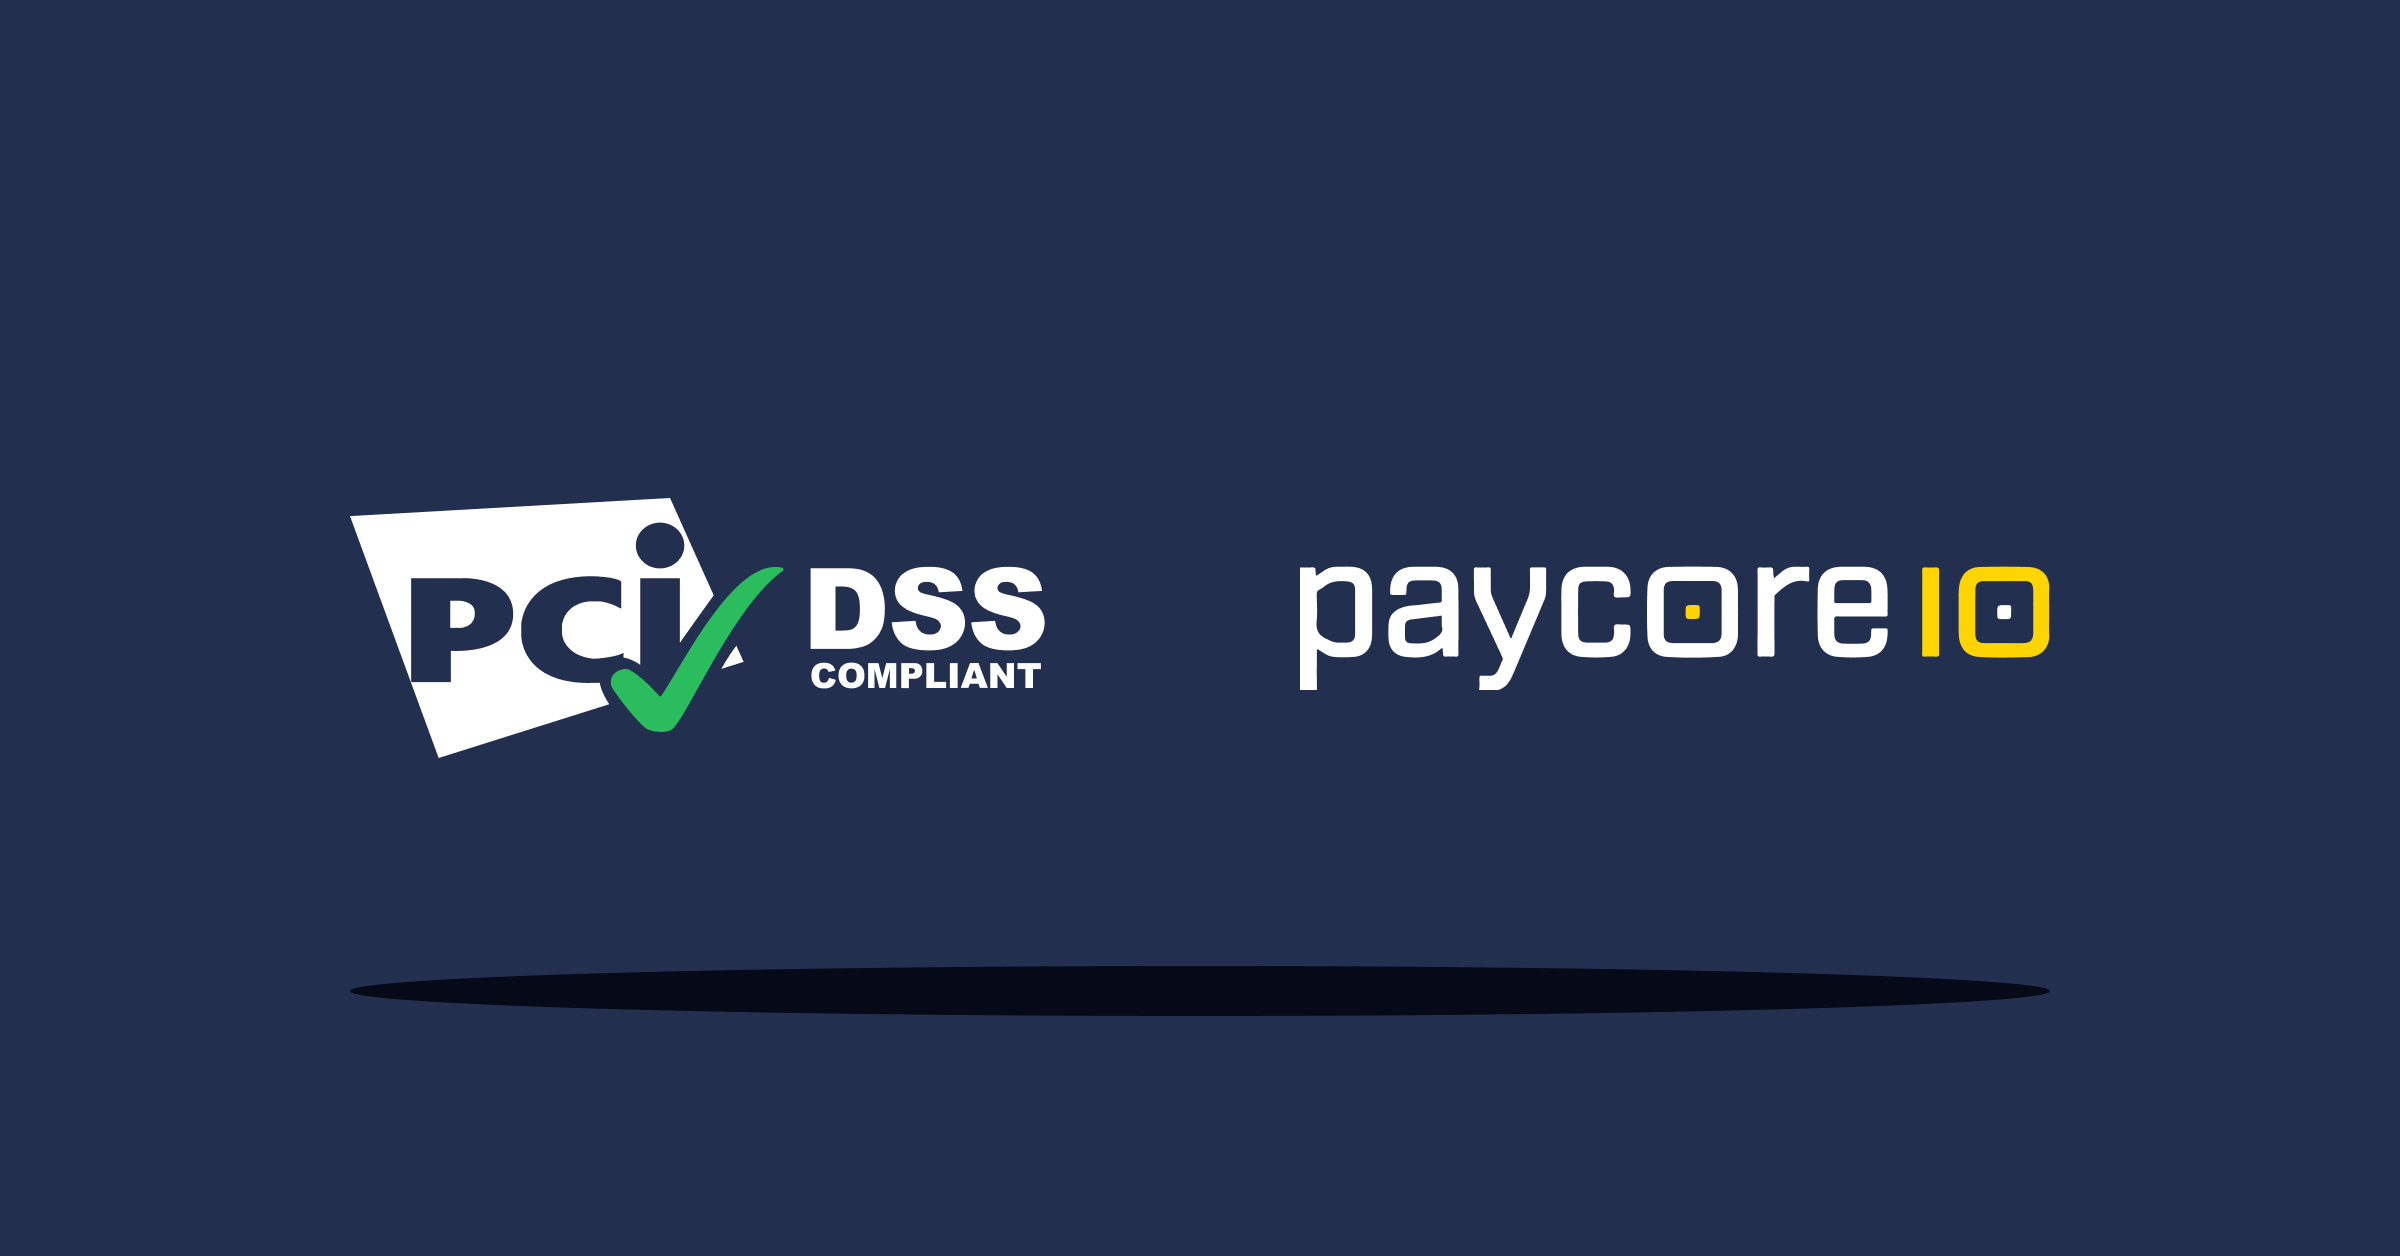 PayCore.io affirmed its compliance with PCI DSS